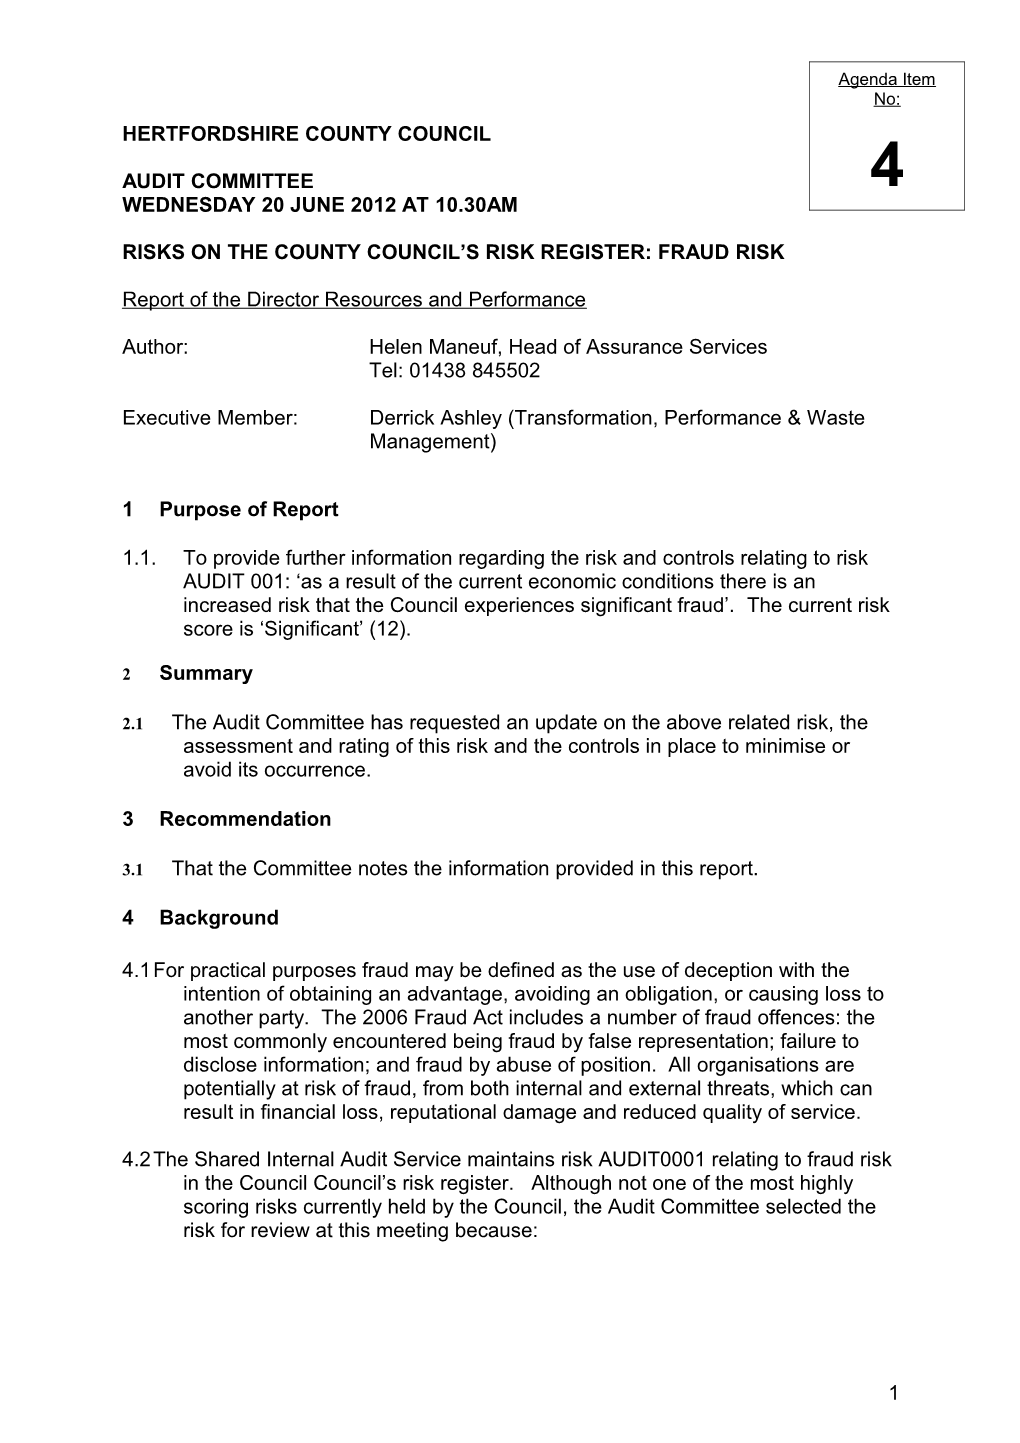 Audit Committee - Wednesday 20 June 2012 at 10.30Am Item 4 - Risks on the County Council's